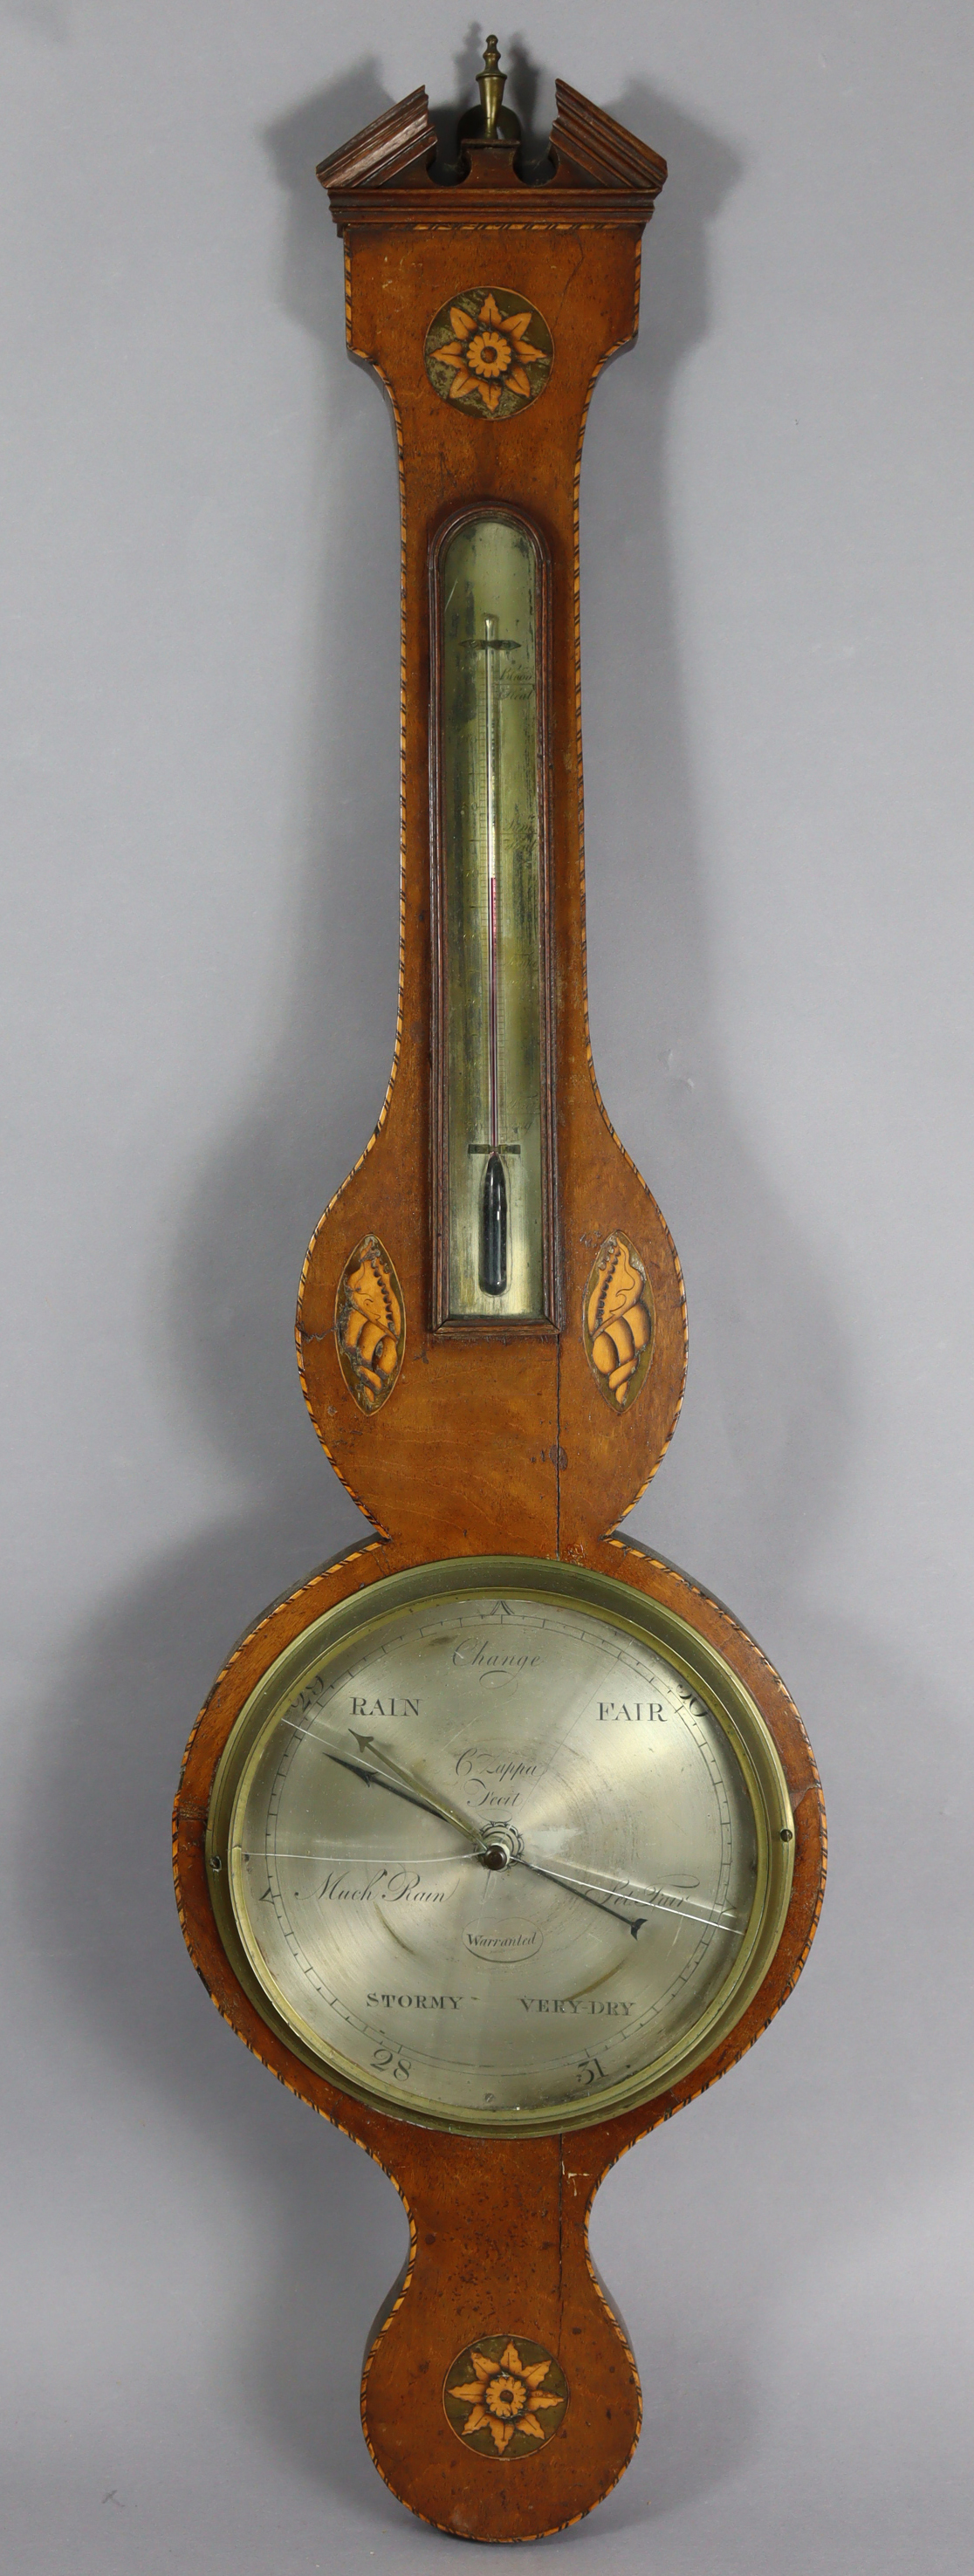 A 19th century marquetry inlaid walnut banjo barometer, the 8” silvered dial inscribed “C. Zappa